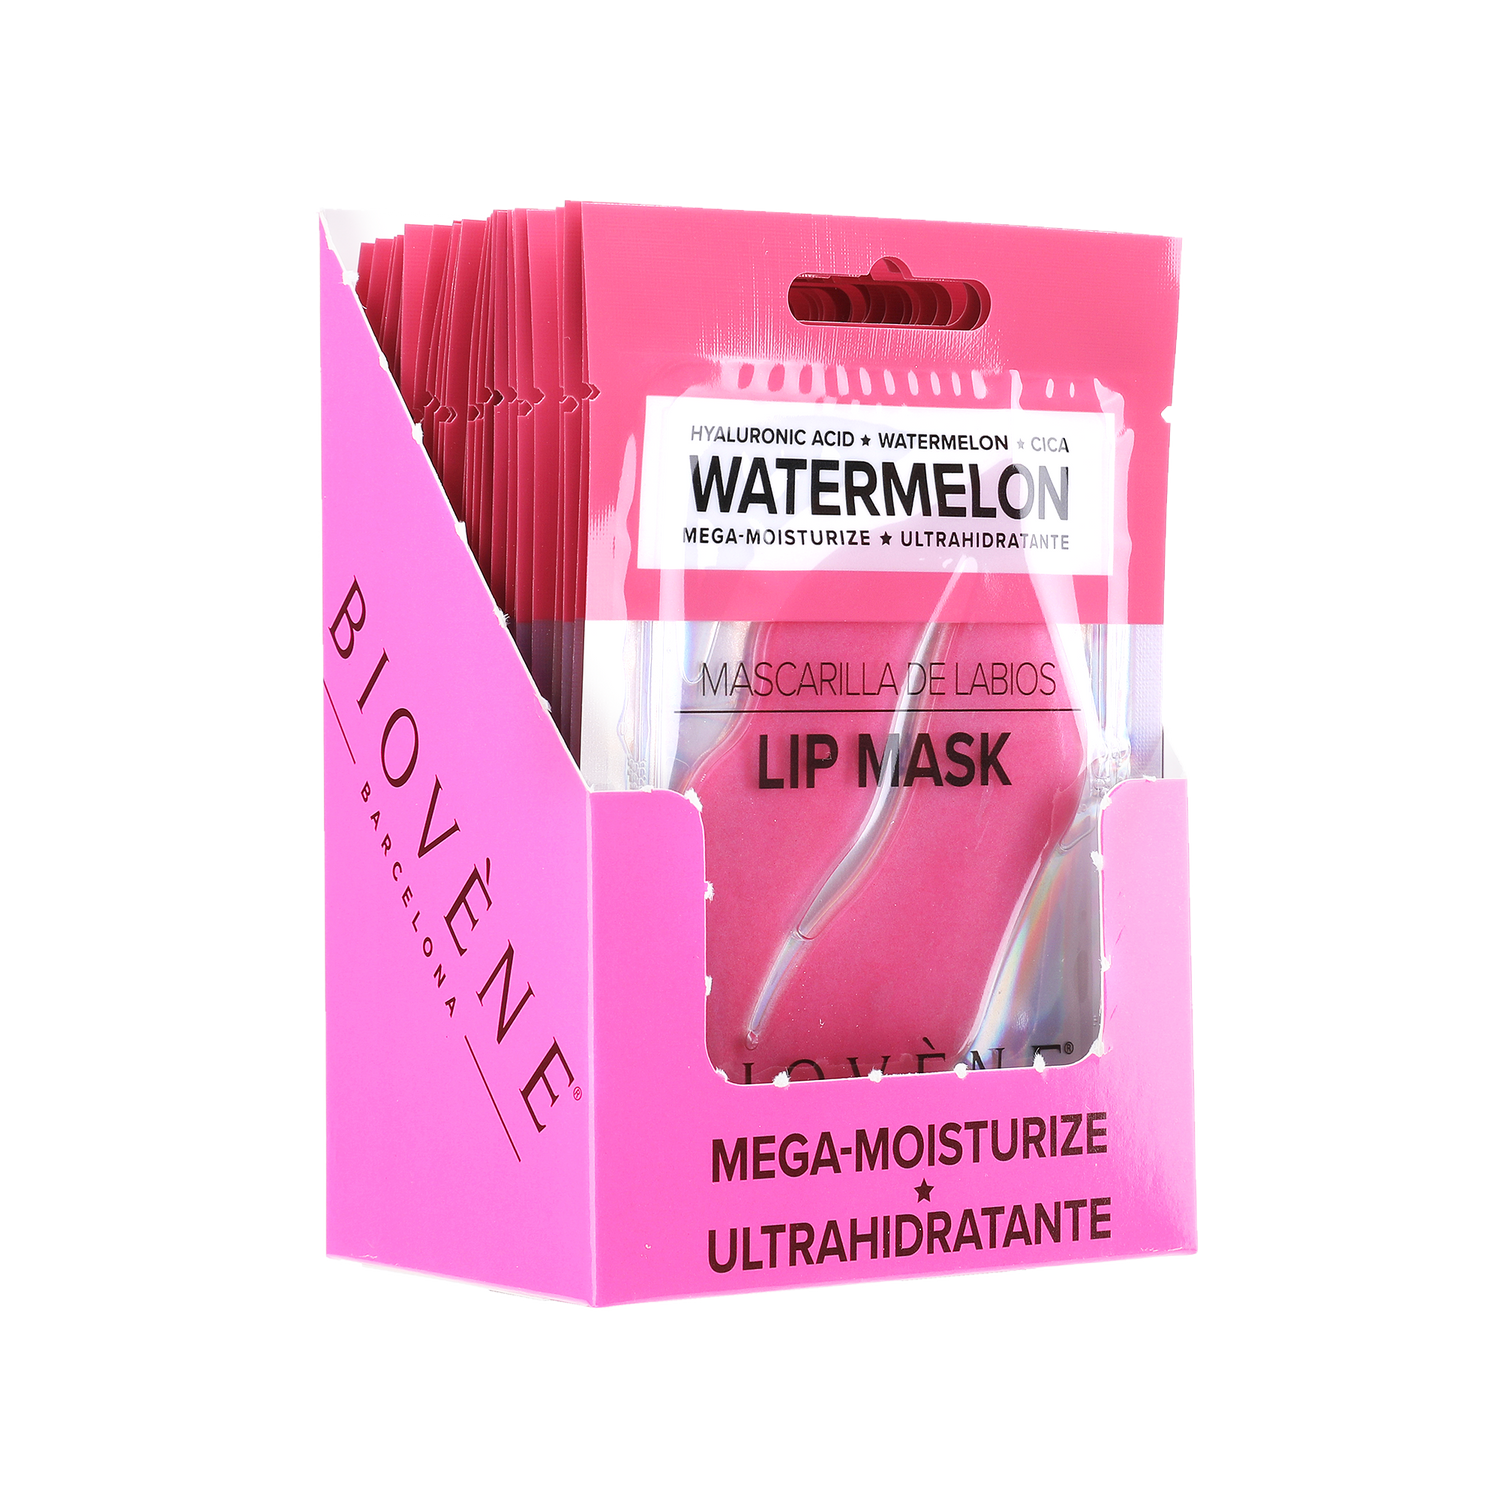 WATERMELON Mega-Moisturize Lip Treatment Mask with Hyaluronic Acid and CICA